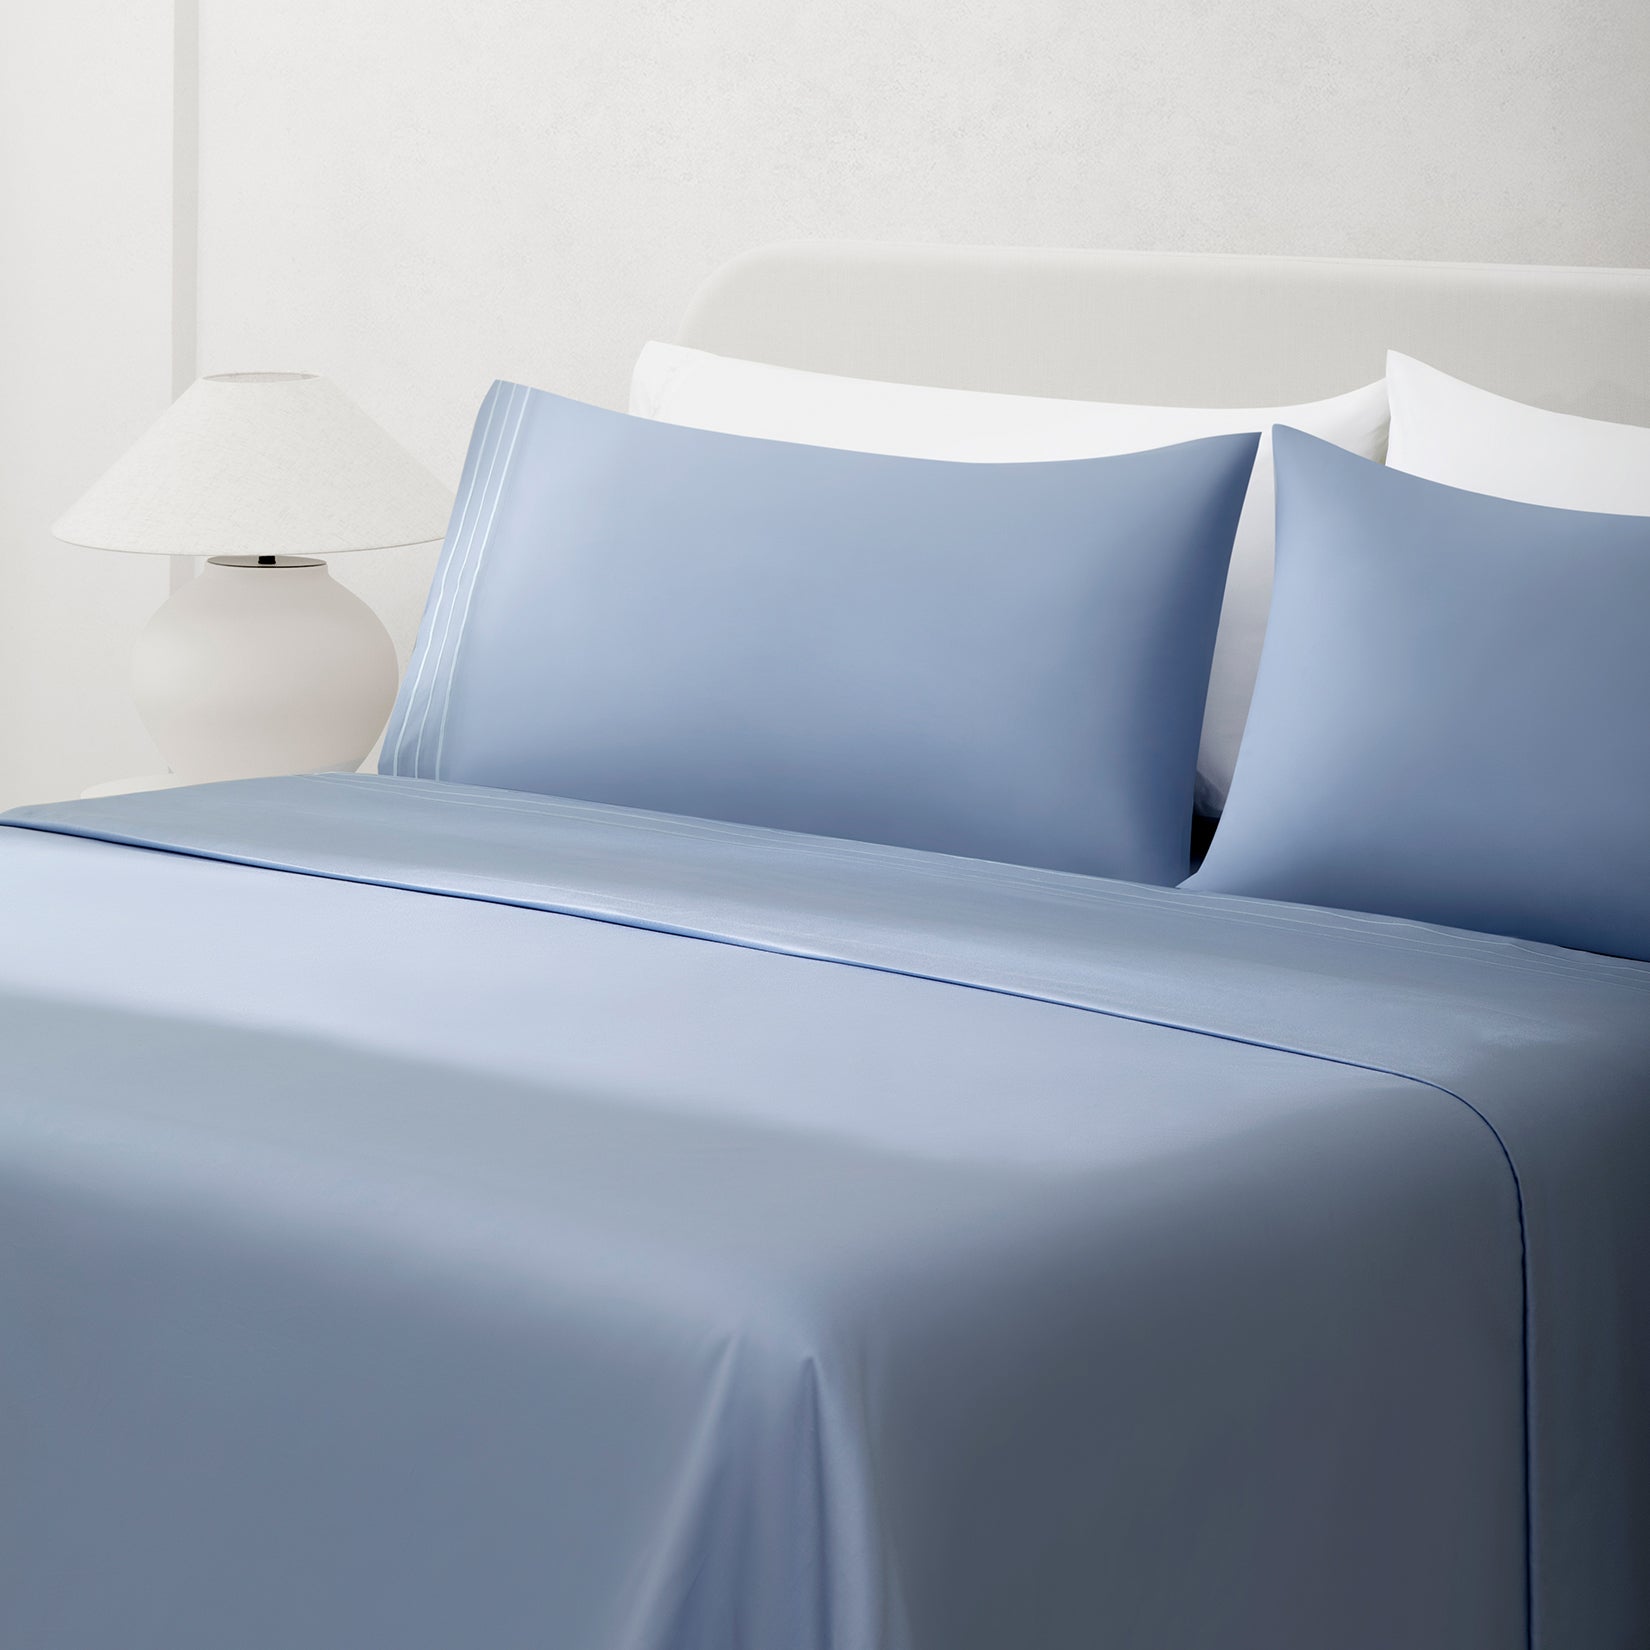 Paulina Sky Blue Satin Stitched Cuff 200 thread count cotton bed sheet set. Sky blue pillows and sky blue cotton sheets on bed next to side table and lamp.